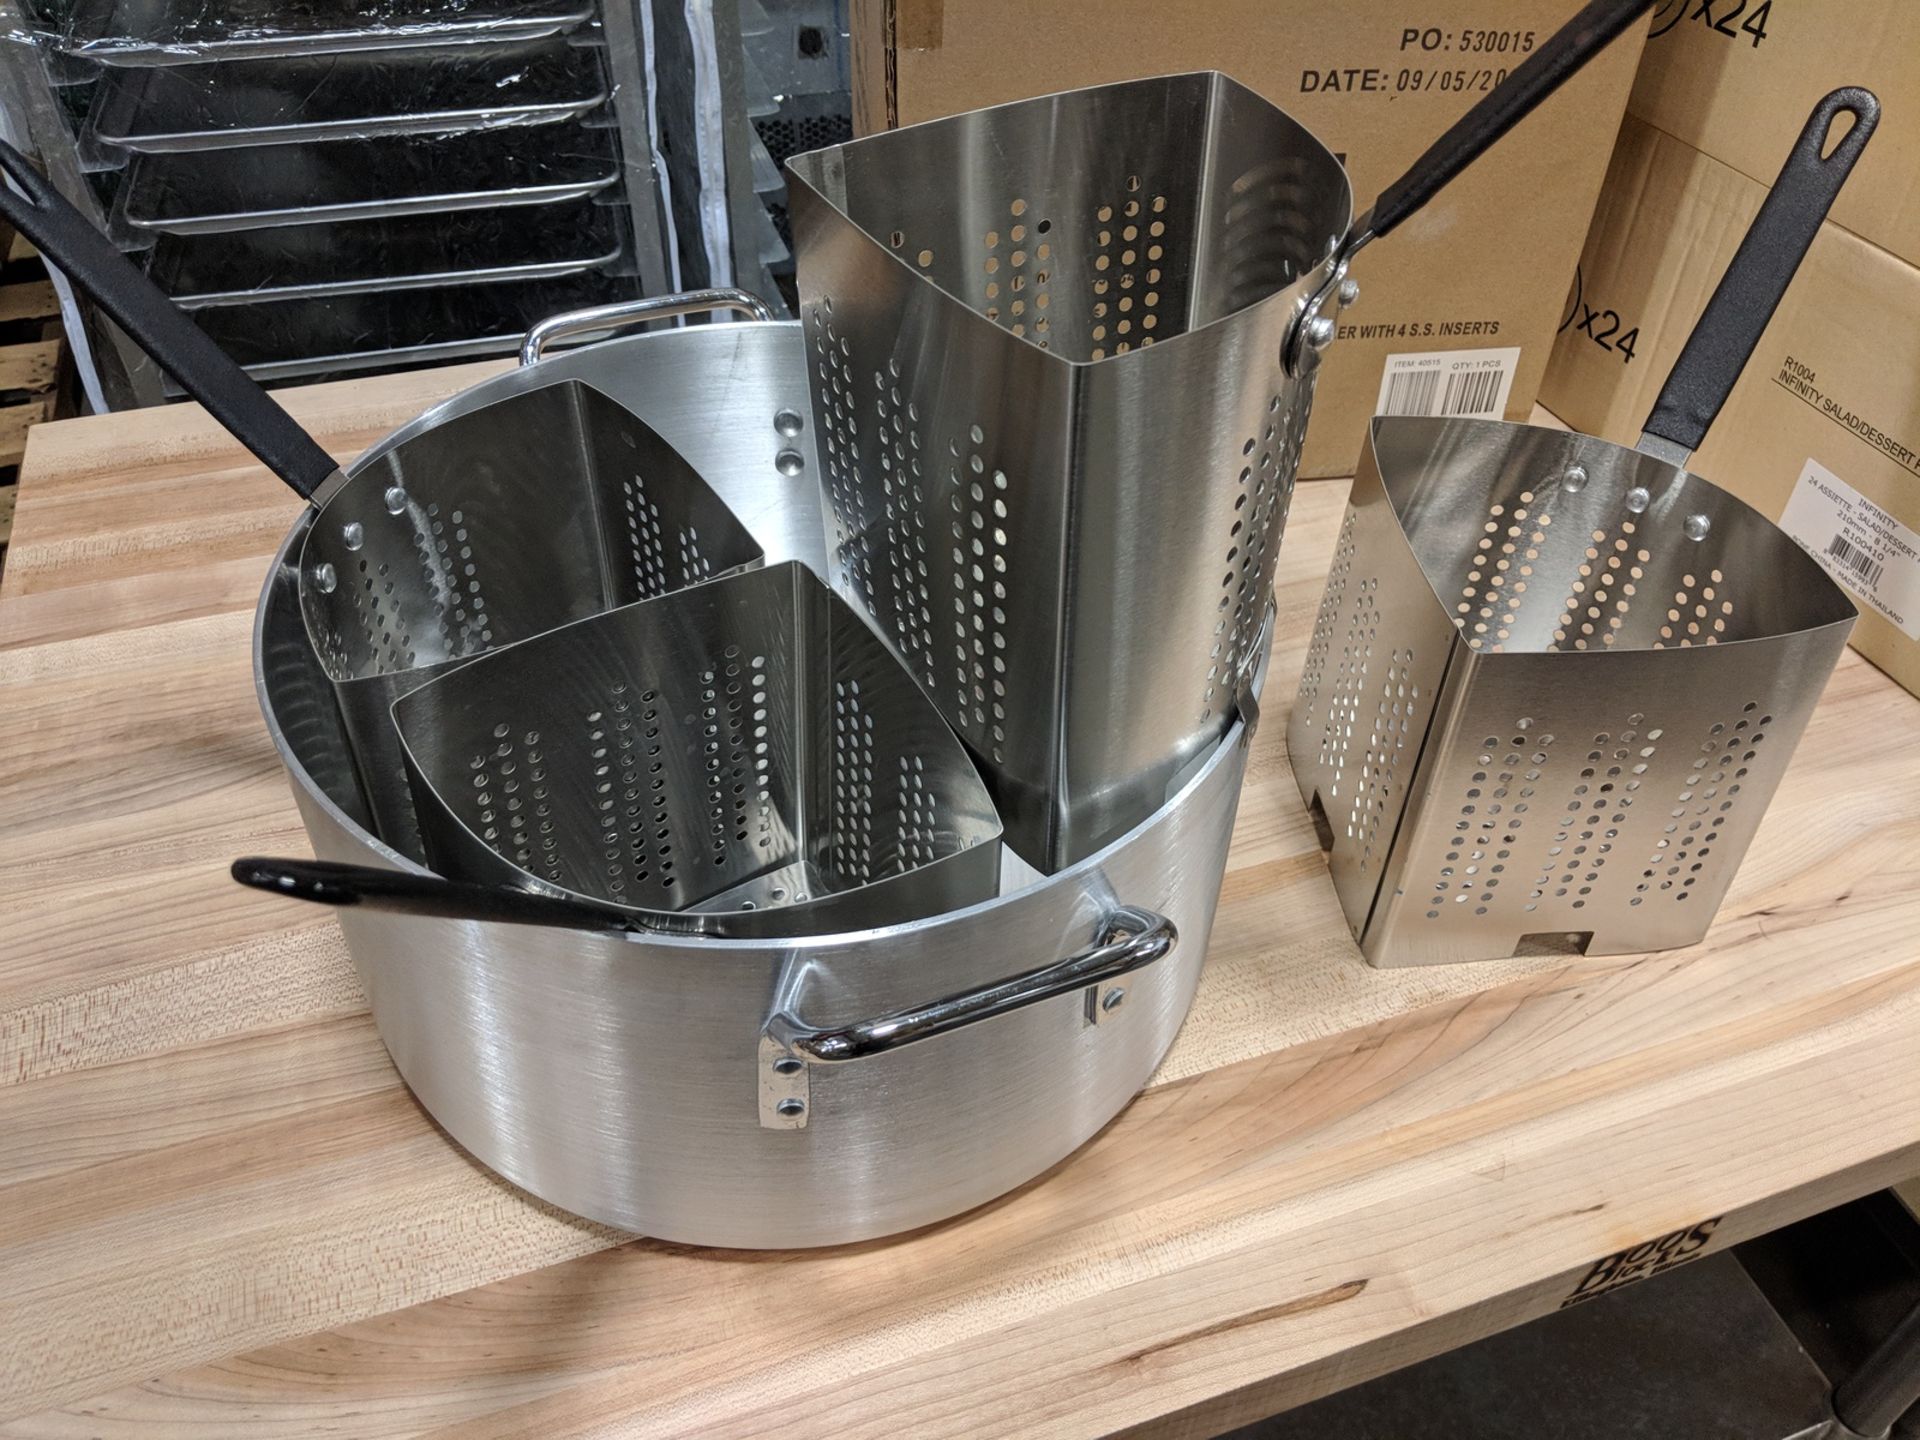 Stainless Pasta Cooker Set w/4 Stainless Steel Inserts - Image 2 of 6